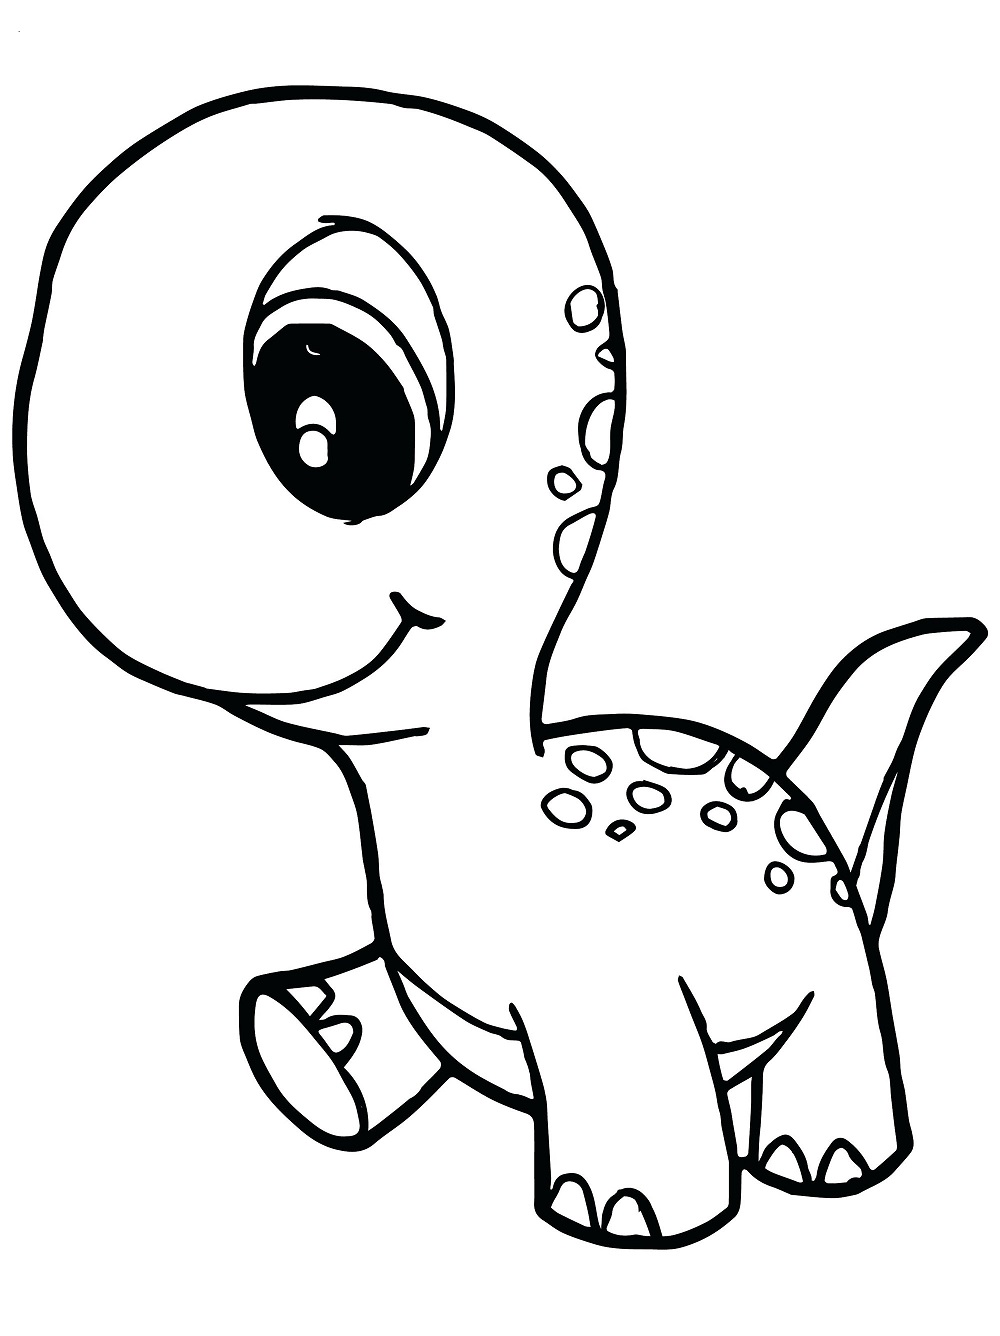 Dinosaur Kids Coloring Pages